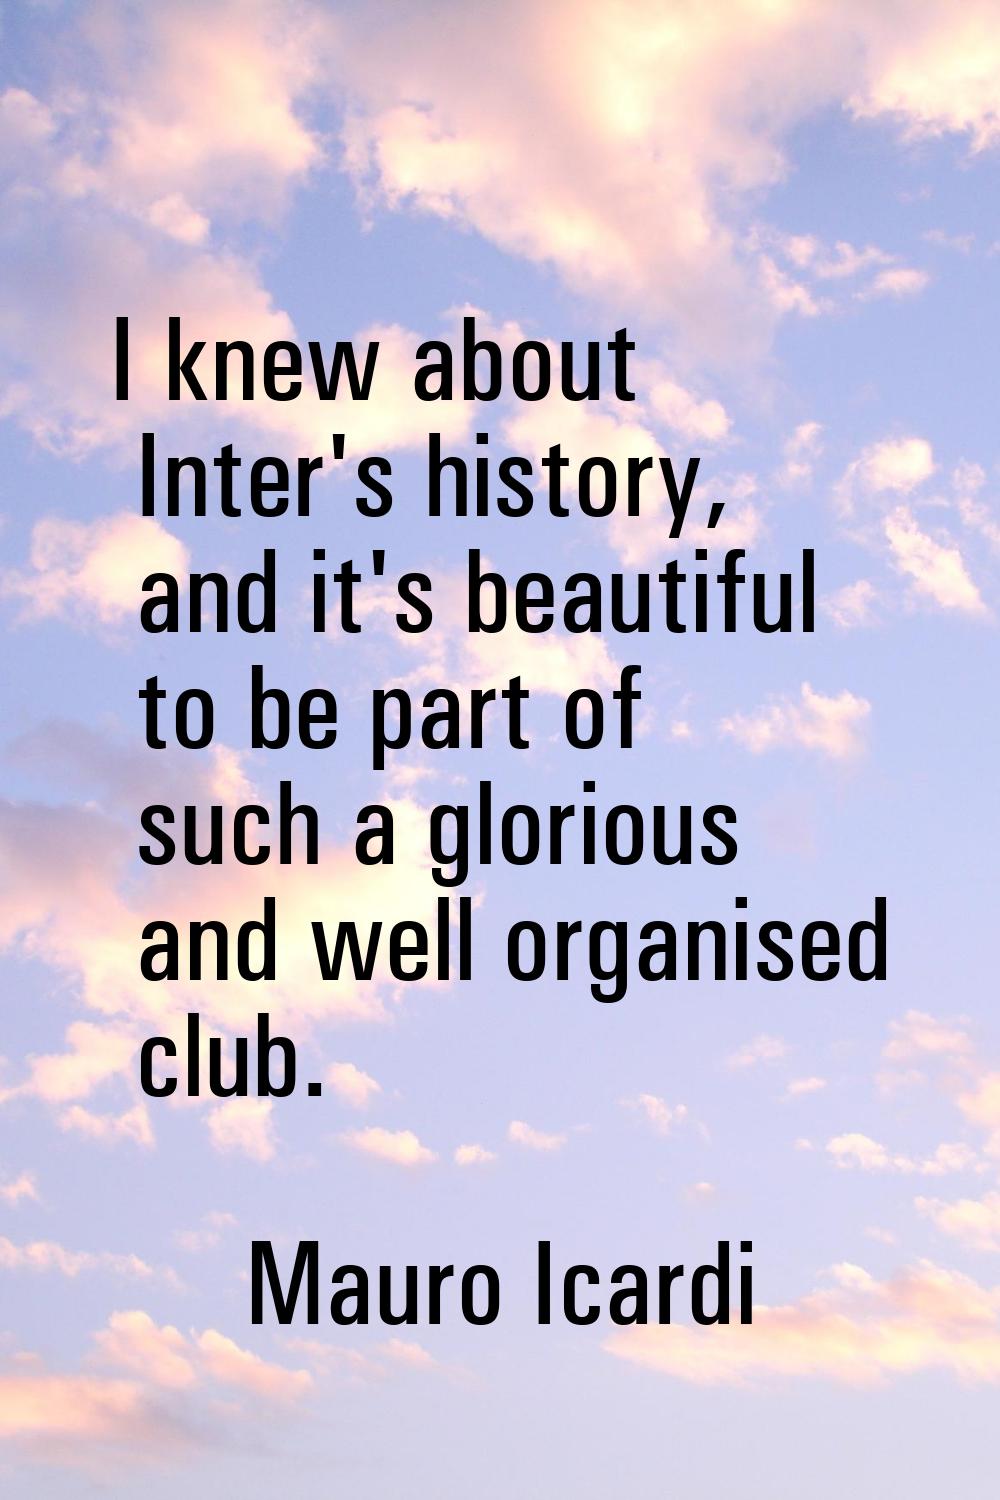 I knew about Inter's history, and it's beautiful to be part of such a glorious and well organised c